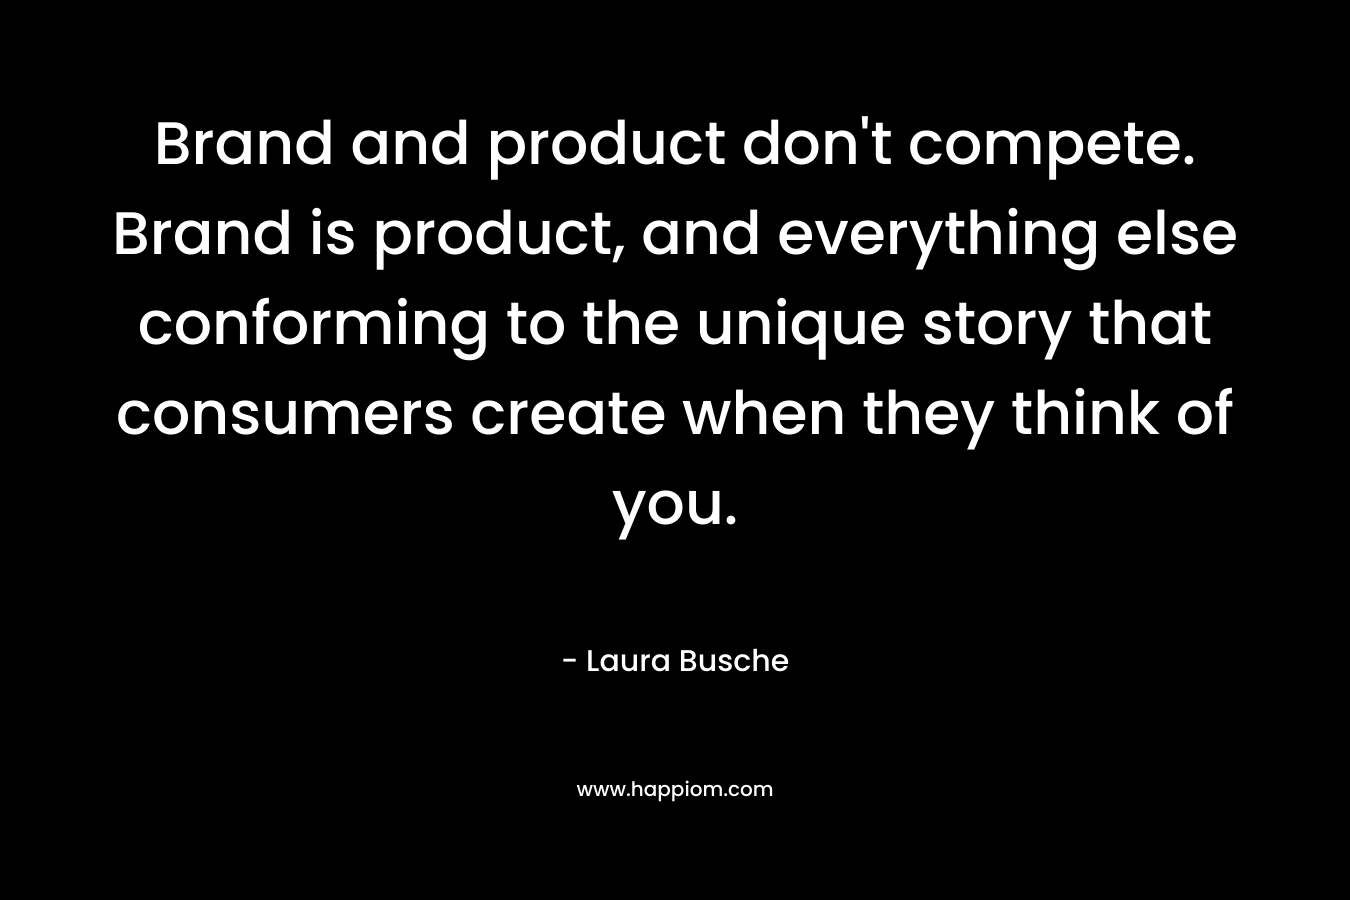 Brand and product don't compete. Brand is product, and everything else conforming to the unique story that consumers create when they think of you.